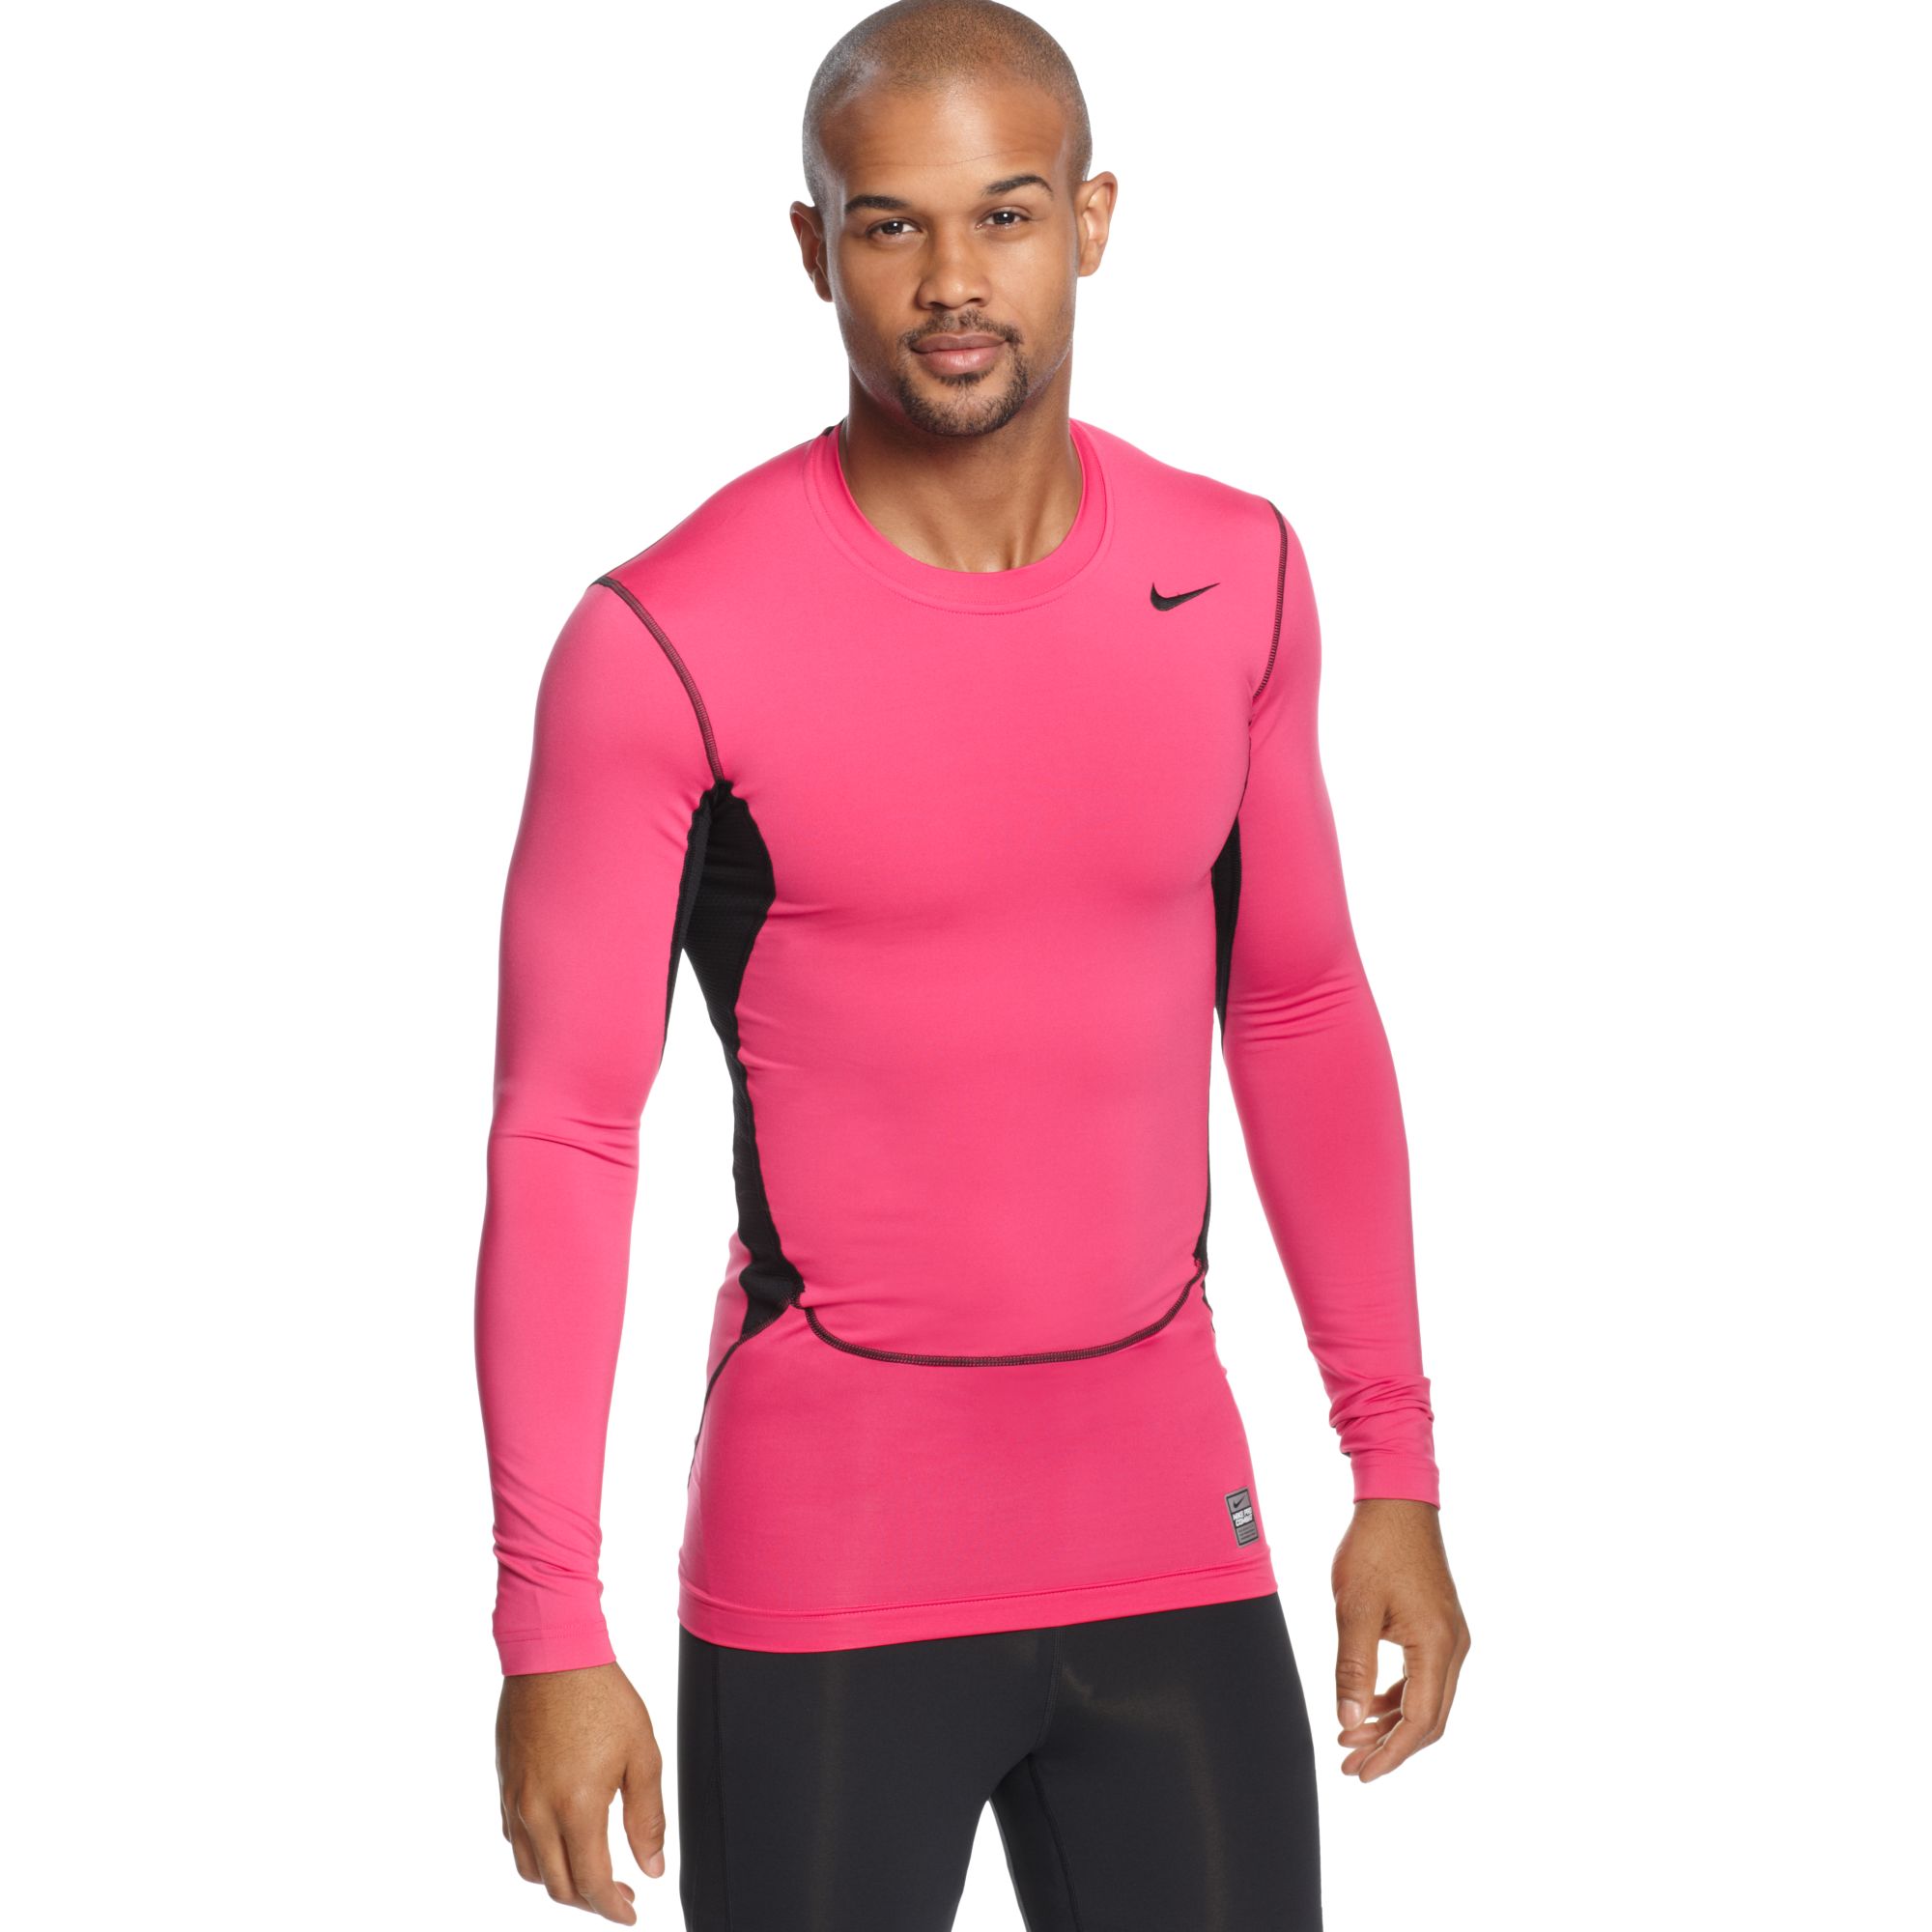 Lyst - Nike Long Sleeved Shirt in Pink for Men